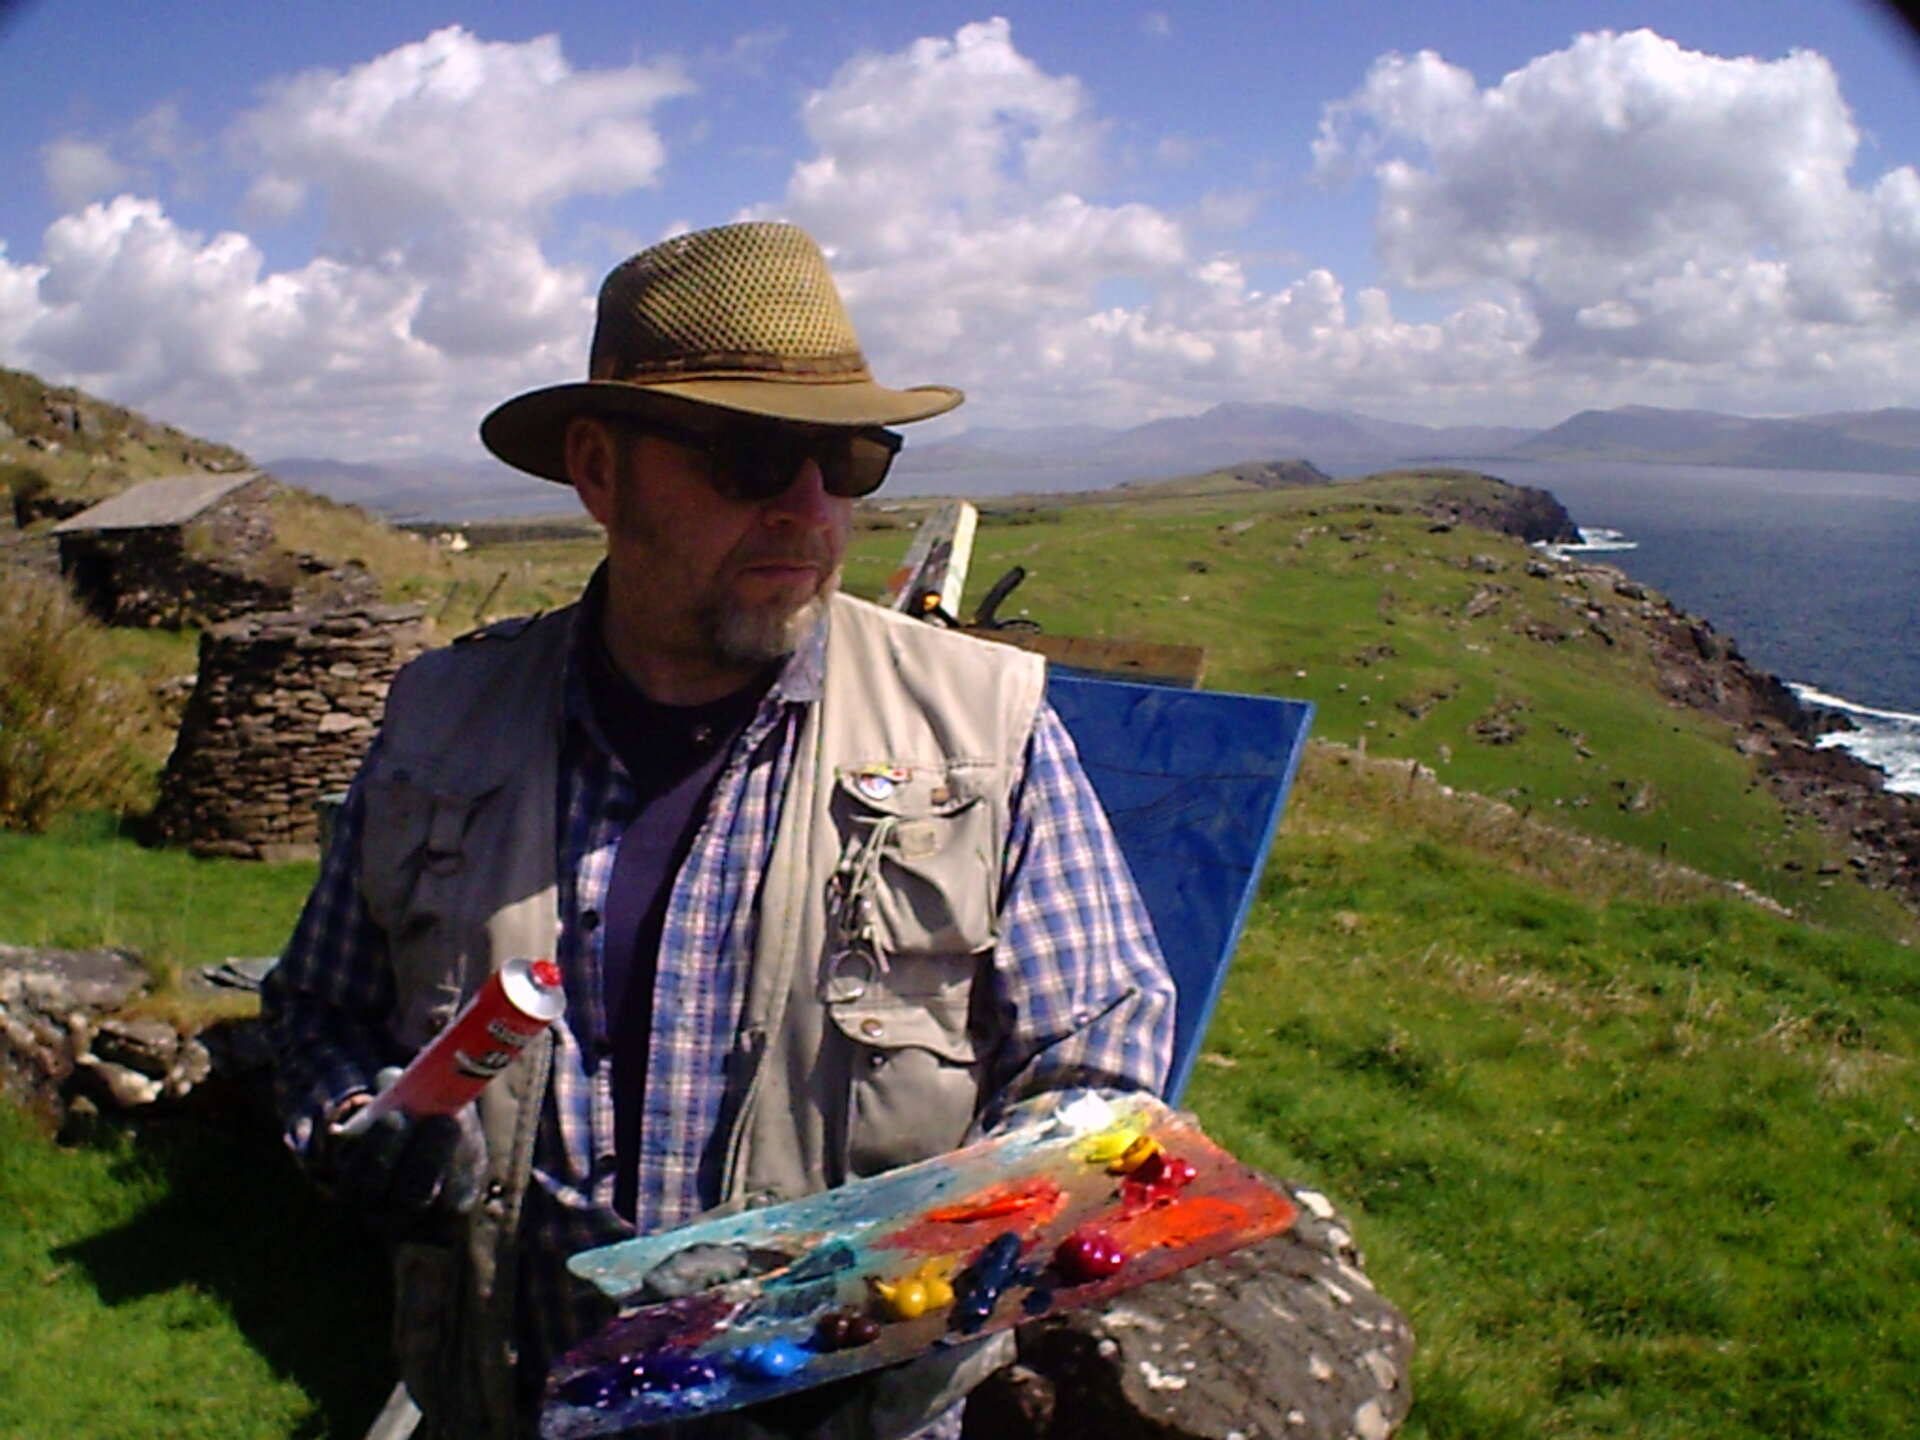 artist rod coyne squeezes extra red paint onto his palette, while working on a clifftop above ballinskelligs bay